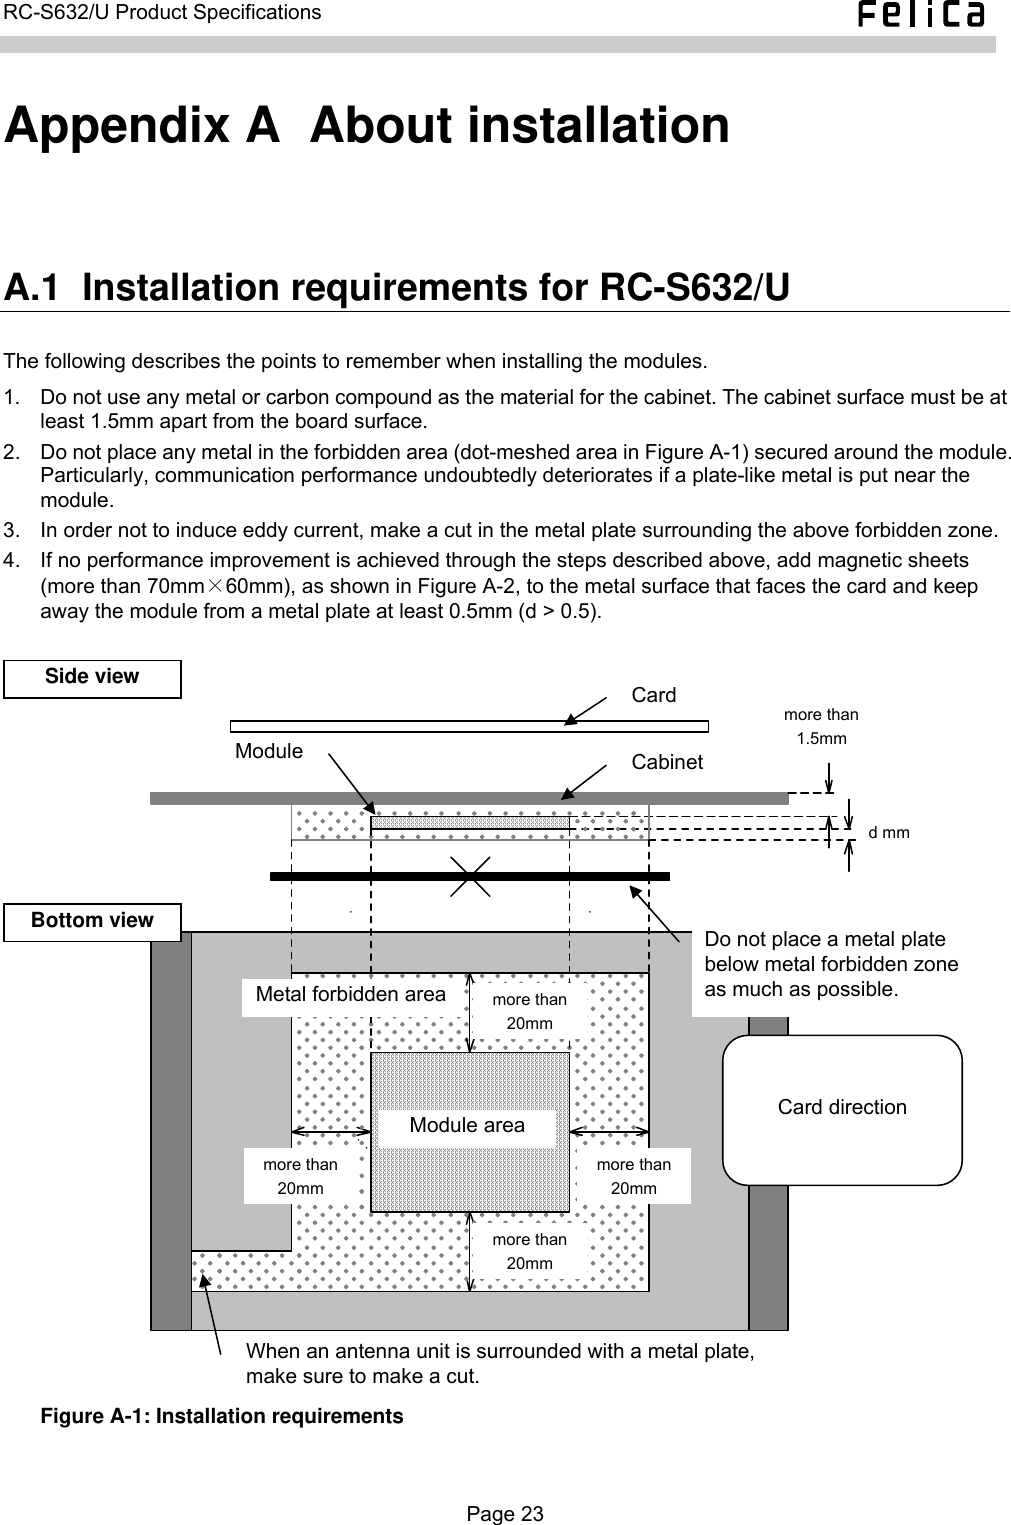   RC-S632/U Product Specifications  Appendix A  About installation A.1  Installation requirements for RC-S632/U The following describes the points to remember when installing the modules. 1.  Do not use any metal or carbon compound as the material for the cabinet. The cabinet surface must be at least 1.5mm apart from the board surface. 2.  Do not place any metal in the forbidden area (dot-meshed area in Figure A-1) secured around the module. Particularly, communication performance undoubtedly deteriorates if a plate-like metal is put near the module. 3.  In order not to induce eddy current, make a cut in the metal plate surrounding the above forbidden zone. 4.  If no performance improvement is achieved through the steps described above, add magnetic sheets (more than 70mm×60mm), as shown in Figure A-2, to the metal surface that faces the card and keep away the module from a metal plate at least 0.5mm (d &gt; 0.5).  d mmDo not place a metal plate below metal forbidden zone as much as possible. 20mm more than When an antenna unit is surrounded with a metal plate,make sure to make a cut. Module  Cabinet Card Card direction Module area 1.5mm more than 20mm more than 20mm more than 20mm more than Metal forbidden areaBottom view Side view  Figure A-1: Installation requirements  Page 23  